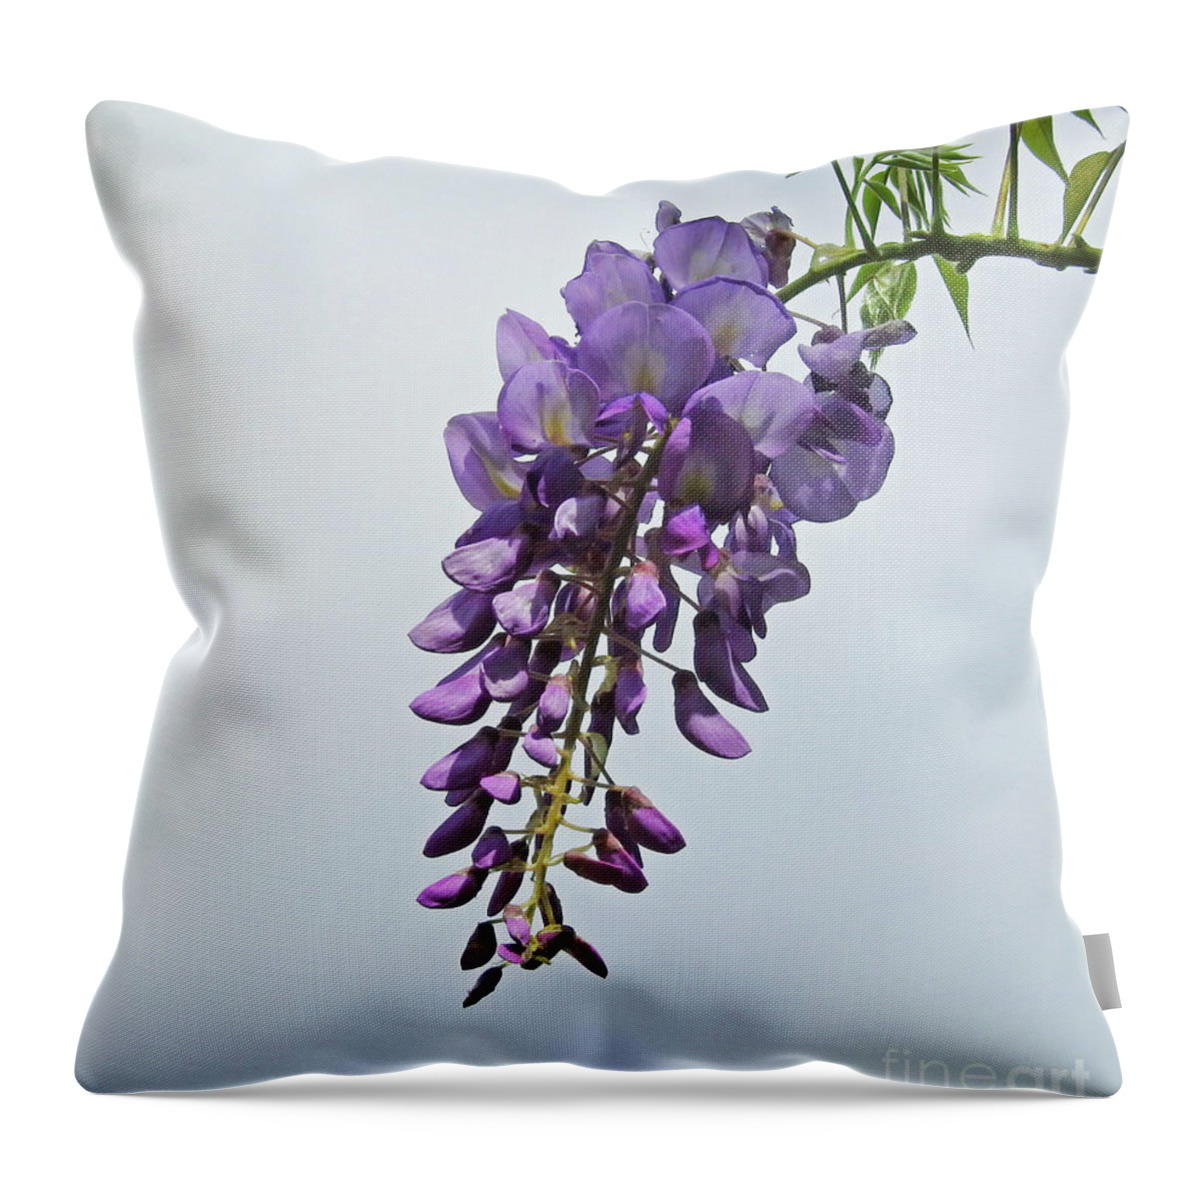 Vine Throw Pillow featuring the photograph A Wisp of Wisteria by Jan Gelders